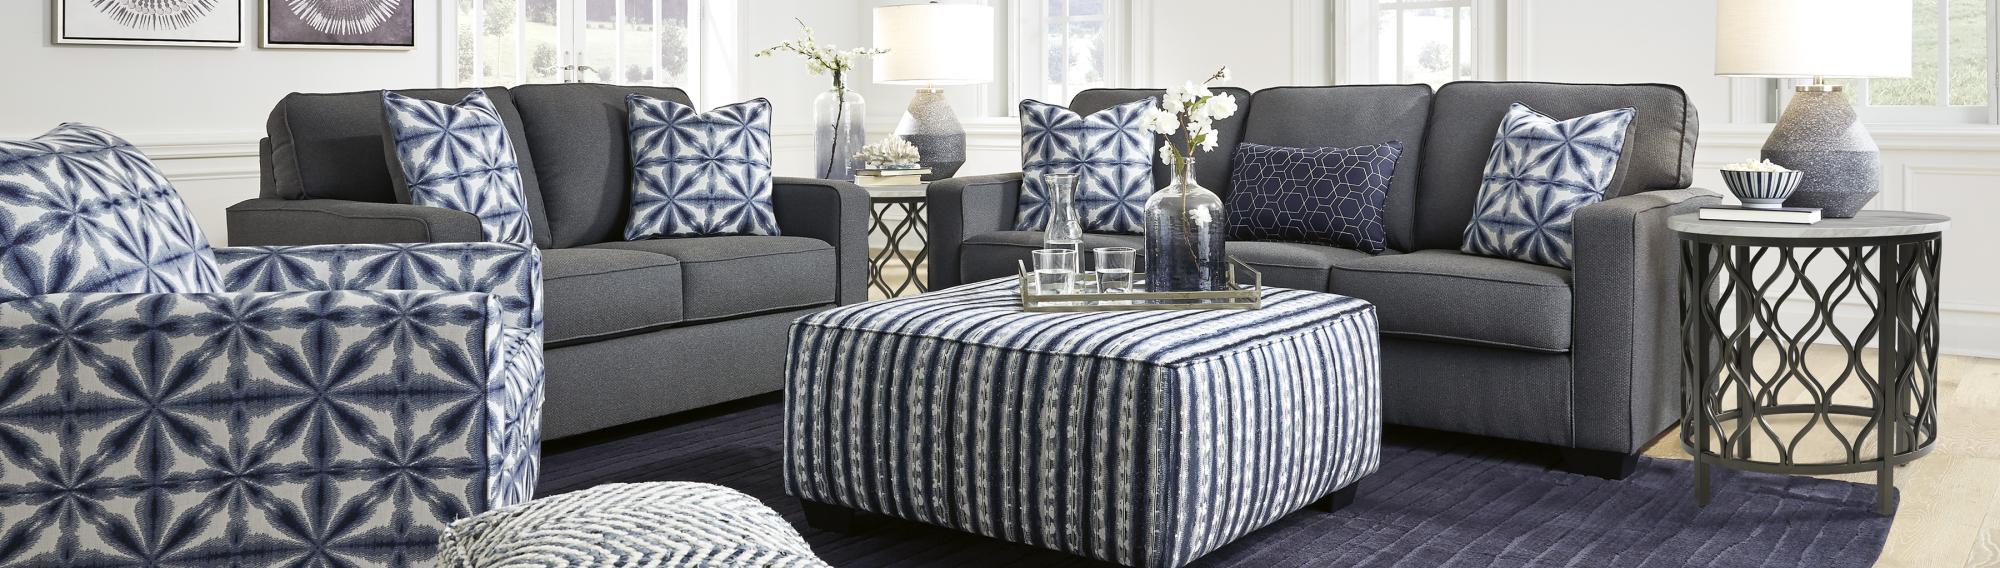 Header image of a Kiessel Nuvella Sofa & Loveseat from Superior Rent to Own